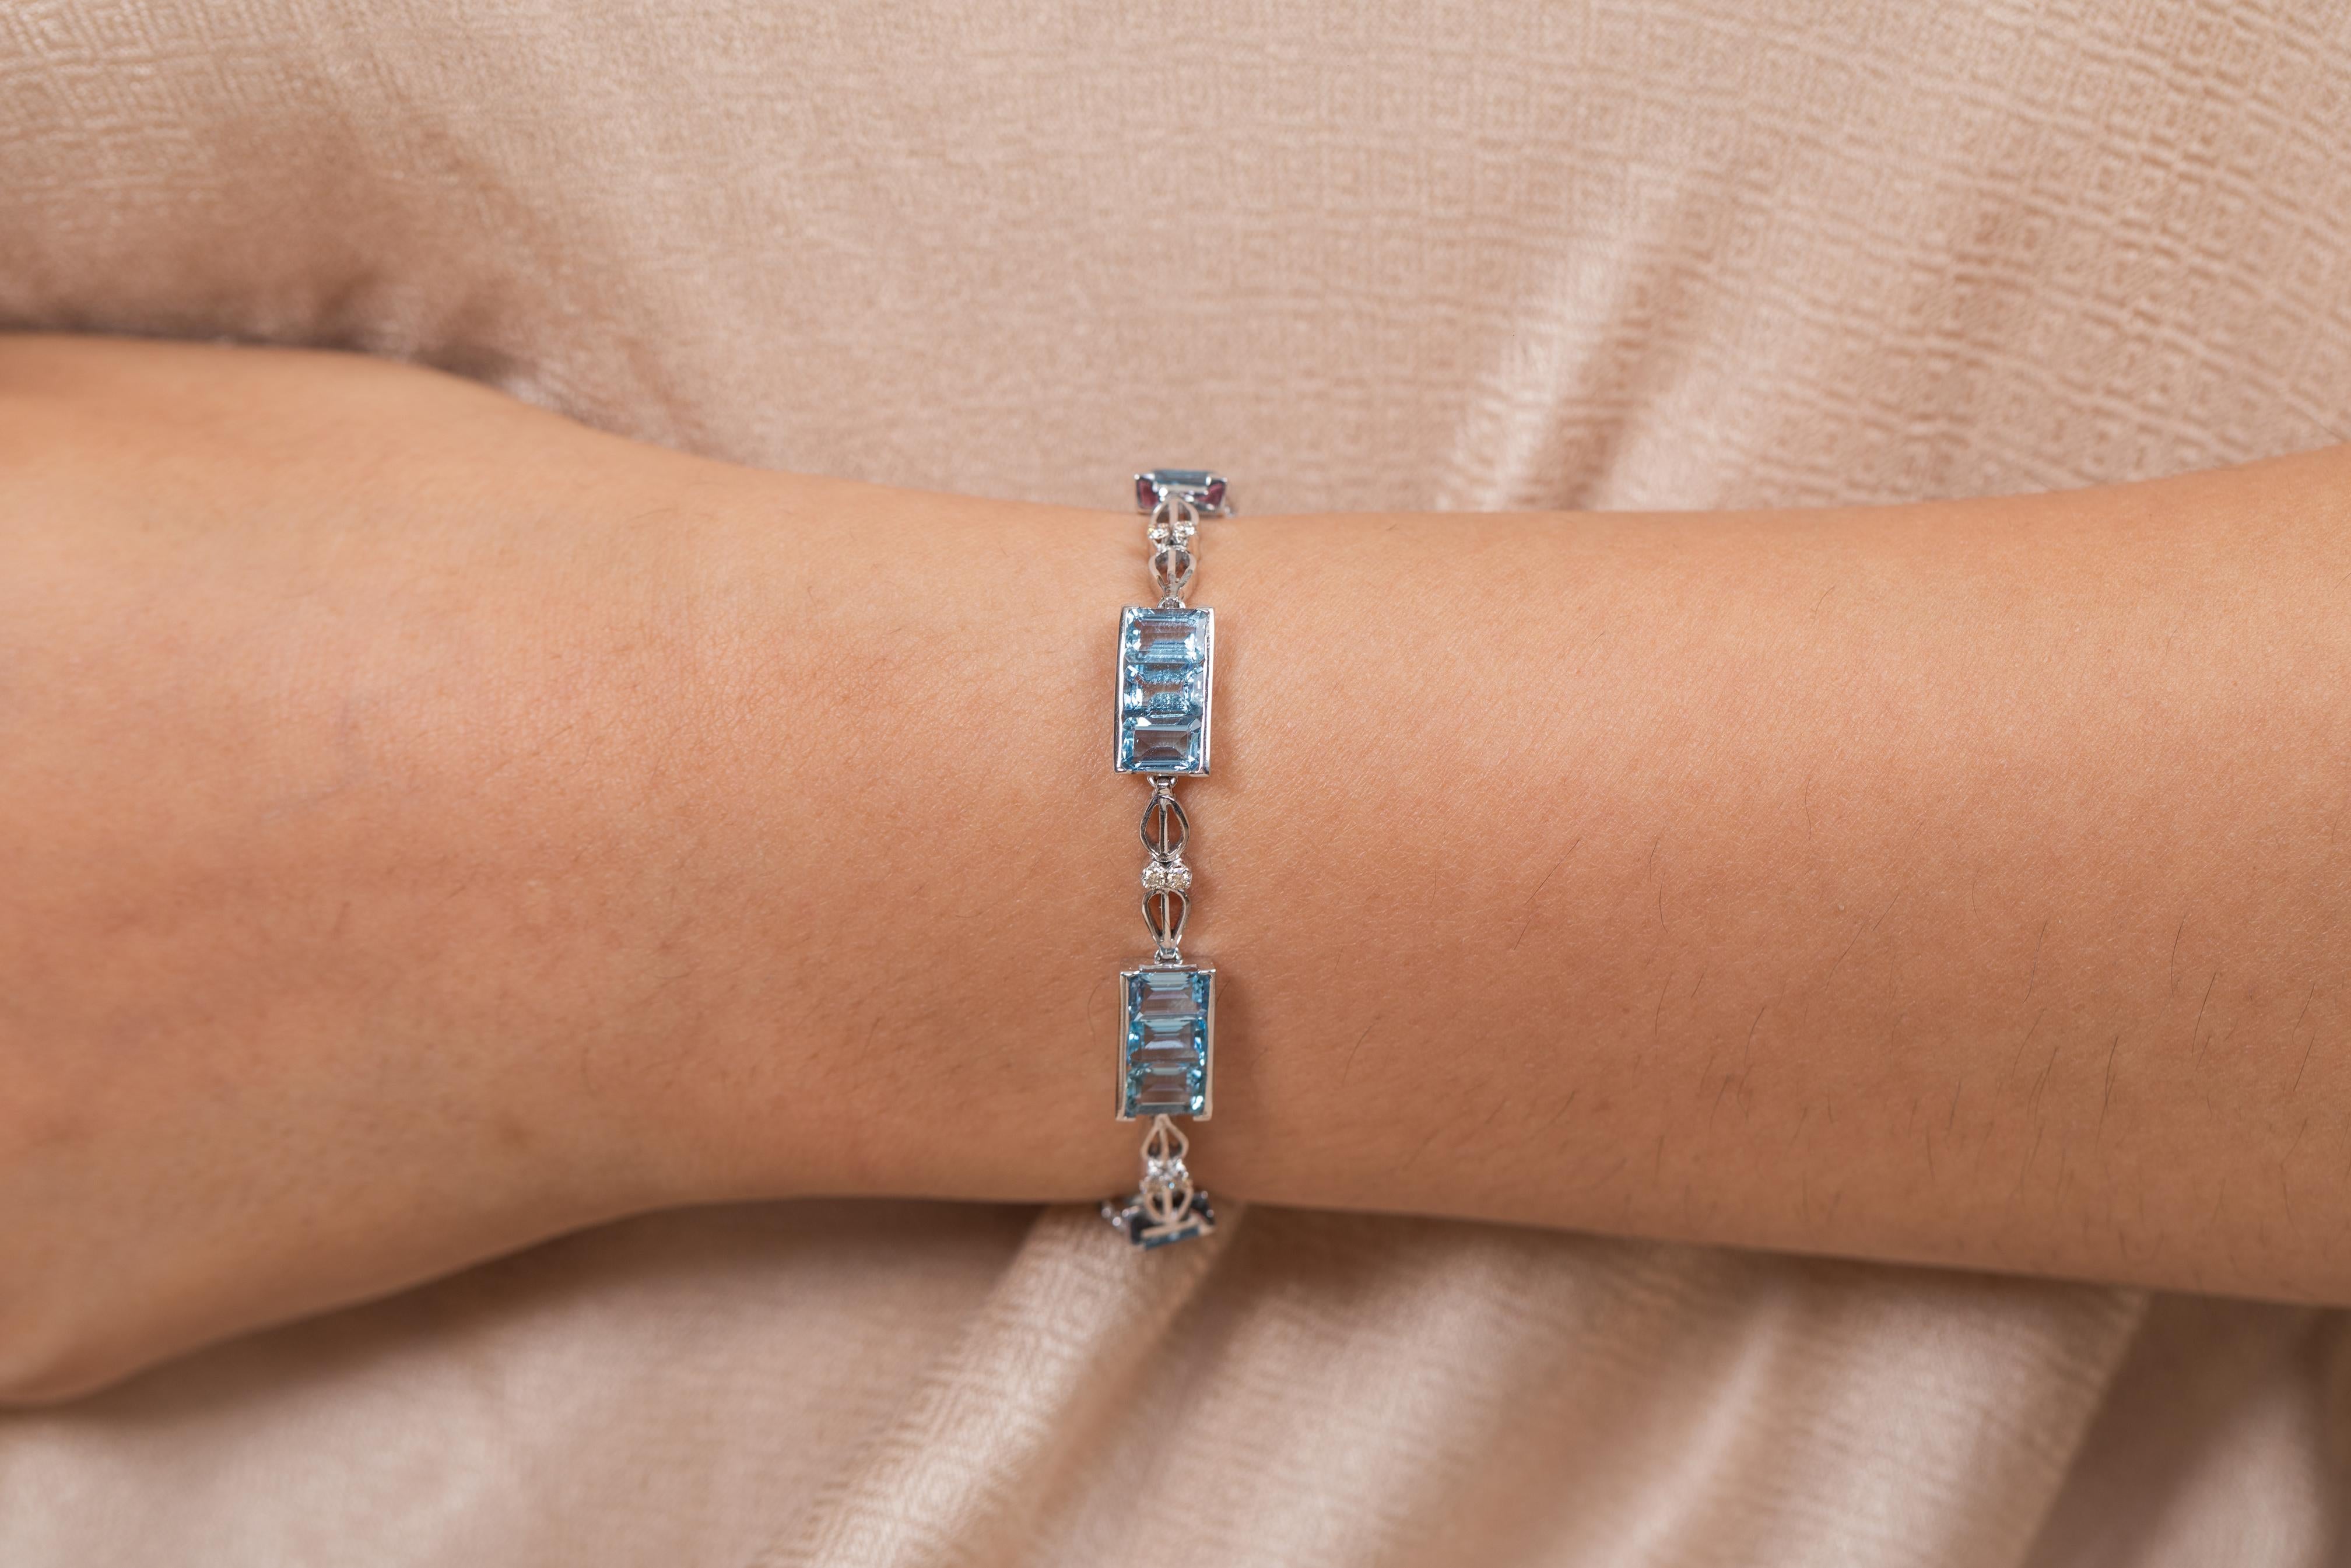 This Aquamarine Diamond Tennis Bracelet in 18K gold showcases 21 endlessly sparkling natural aquamarines, weighing 10.84 carats and 14 pieces of diamonds weighing 0.31 carats. It measures 7.75 inches long in length. 
Aquamarine is useful for moving